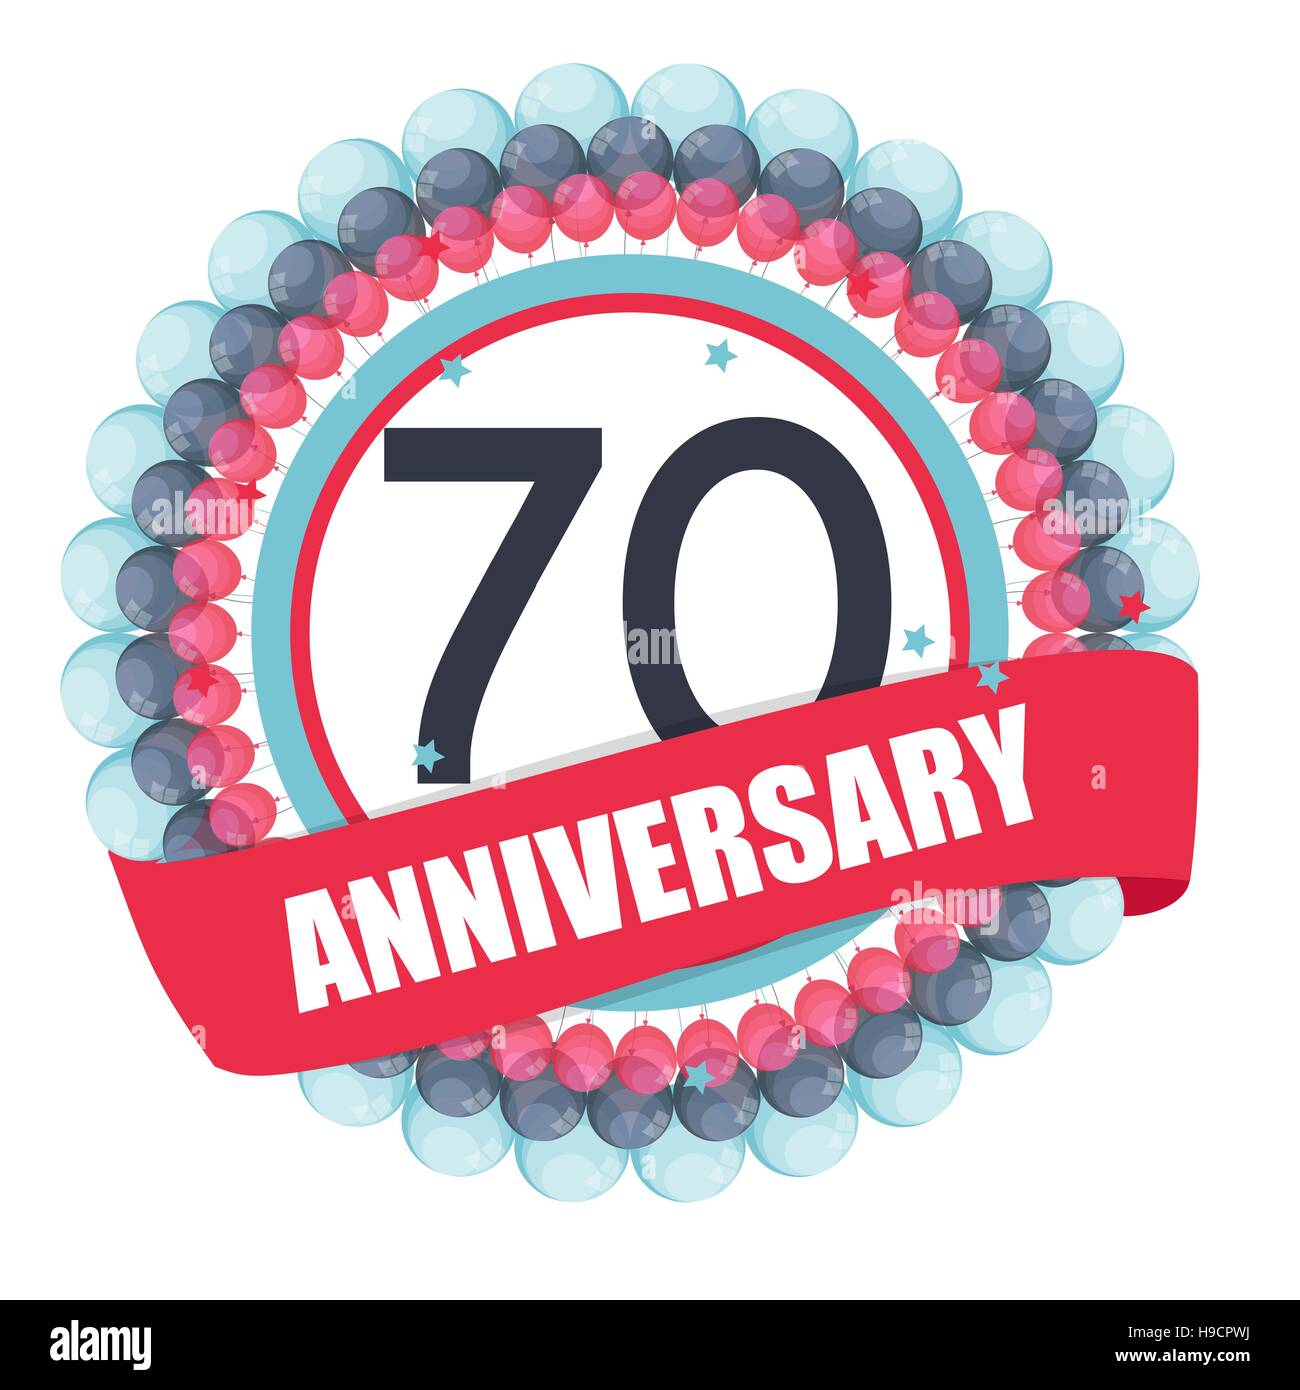 Cute Template 70 Years Anniversary with Balloons and Ribbon Vector Illustration EPS10 Stock Vector